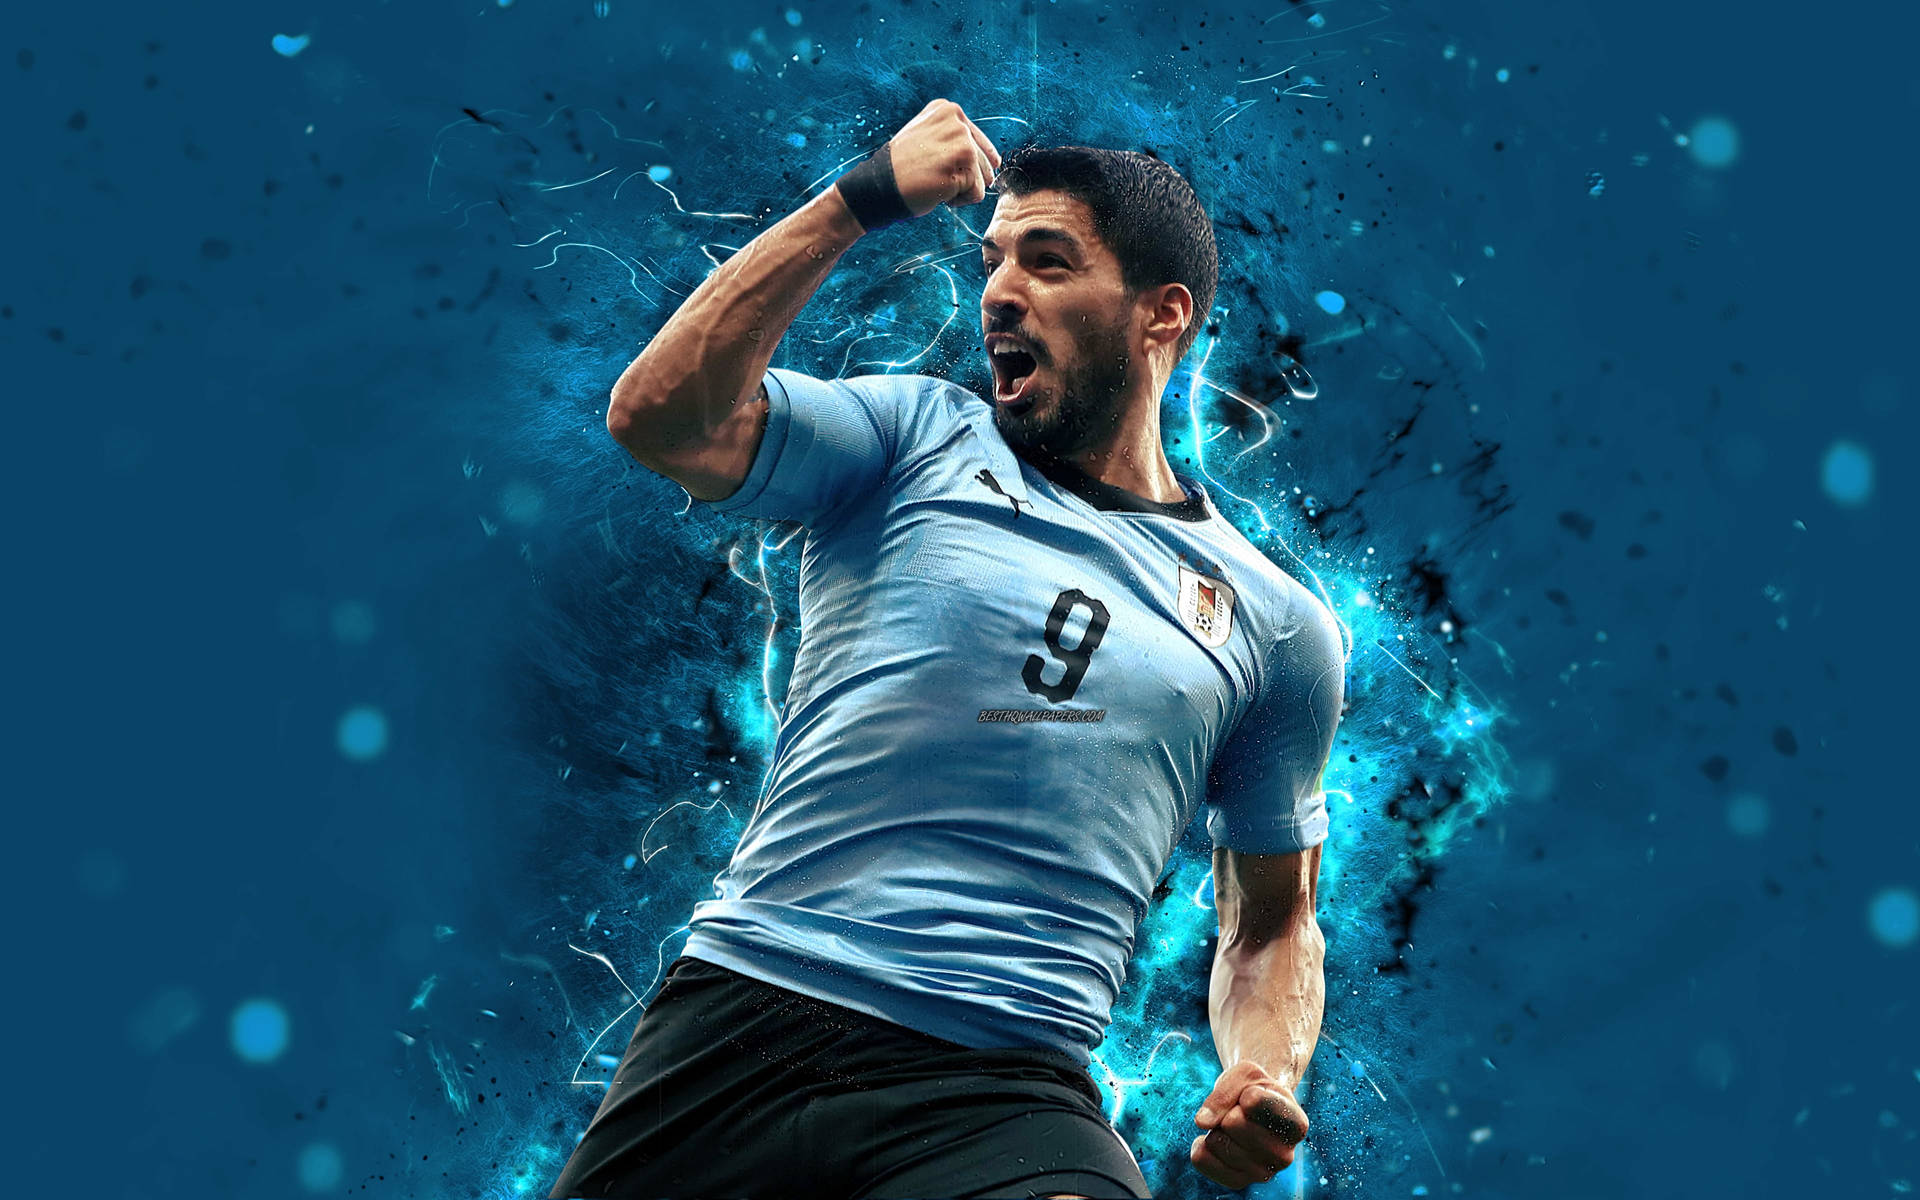 Luis Suarez in action for the Uruguay National Football Team Wallpaper